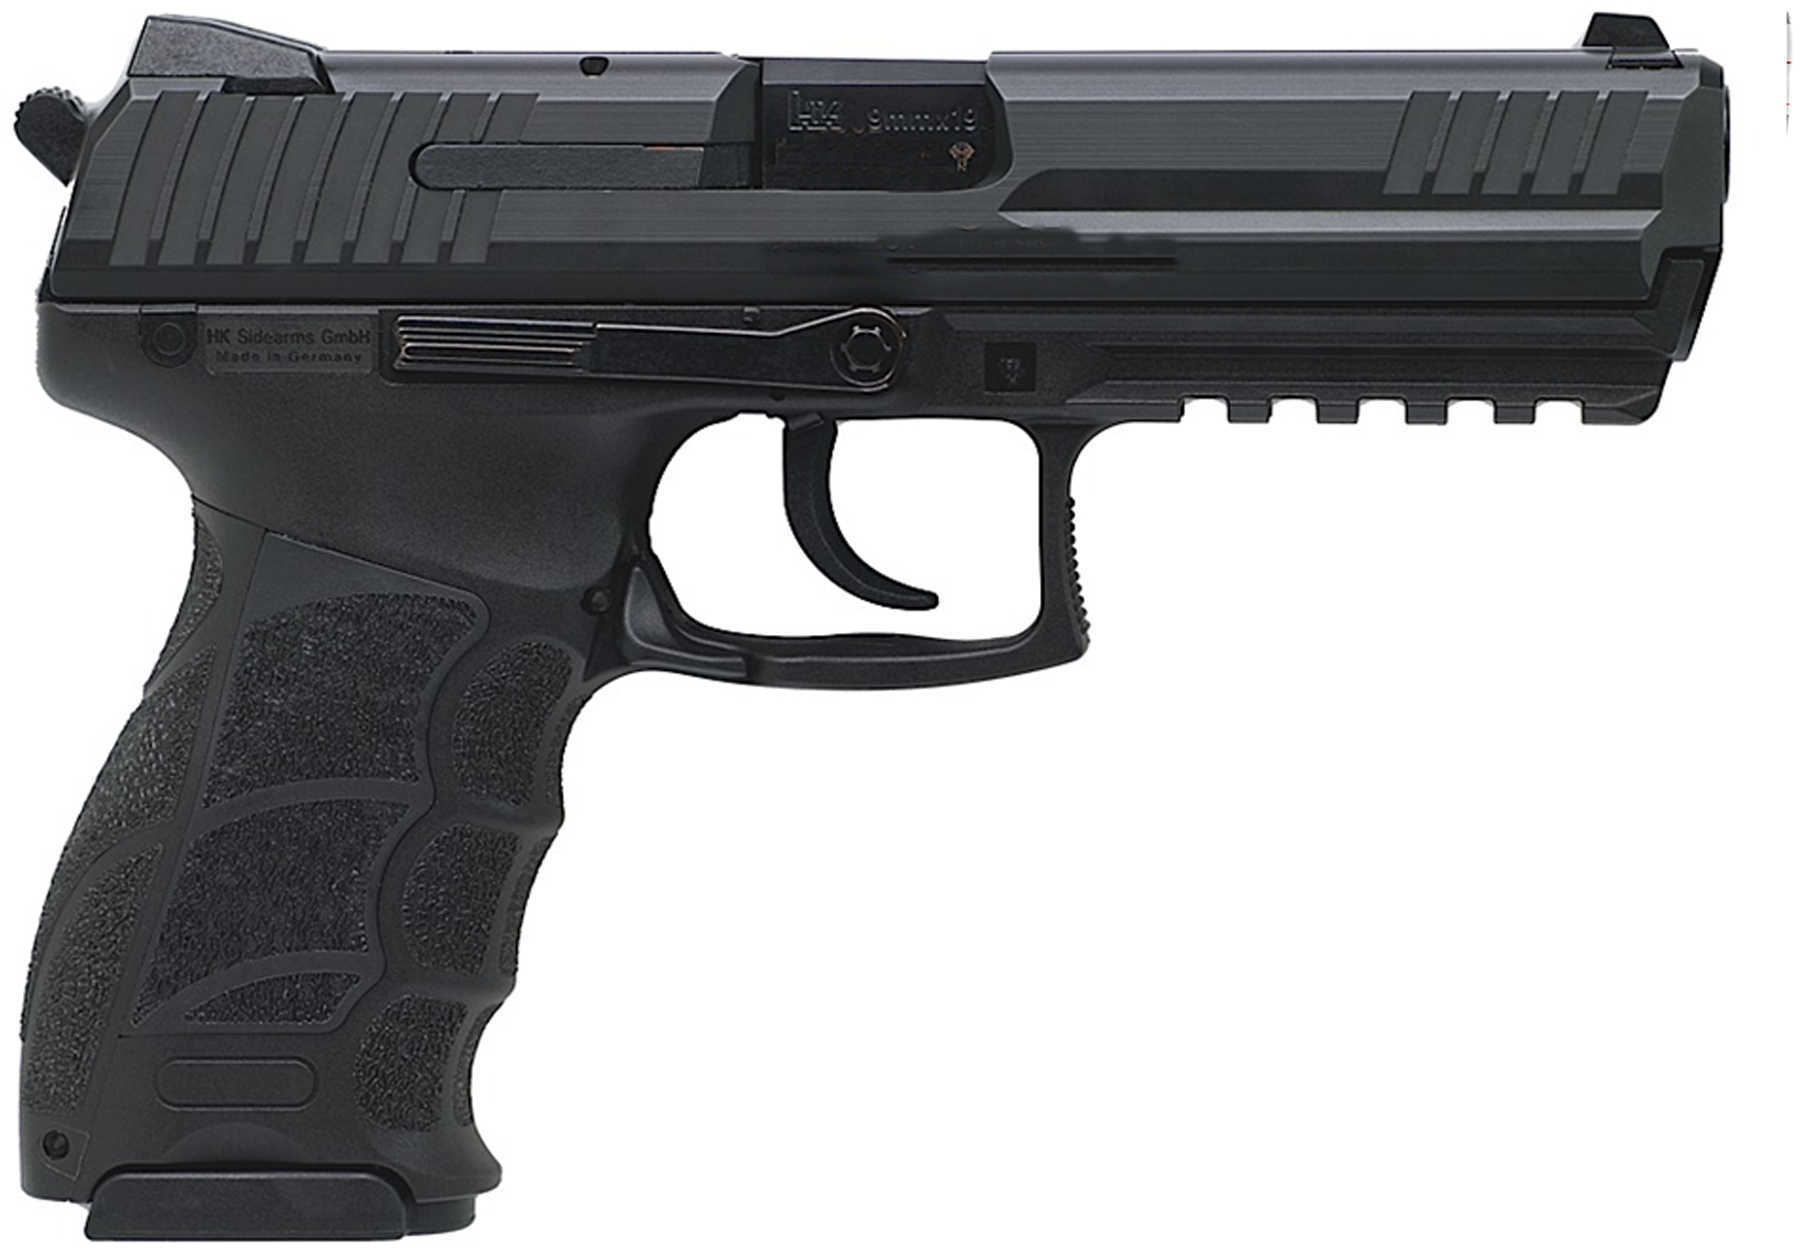 Heckler & Koch P30LS V3 40 S&W DA/SA Actions Ambidextrous Safety/Decock 10 Round Semi Automatic Pistol 734003LS-A5